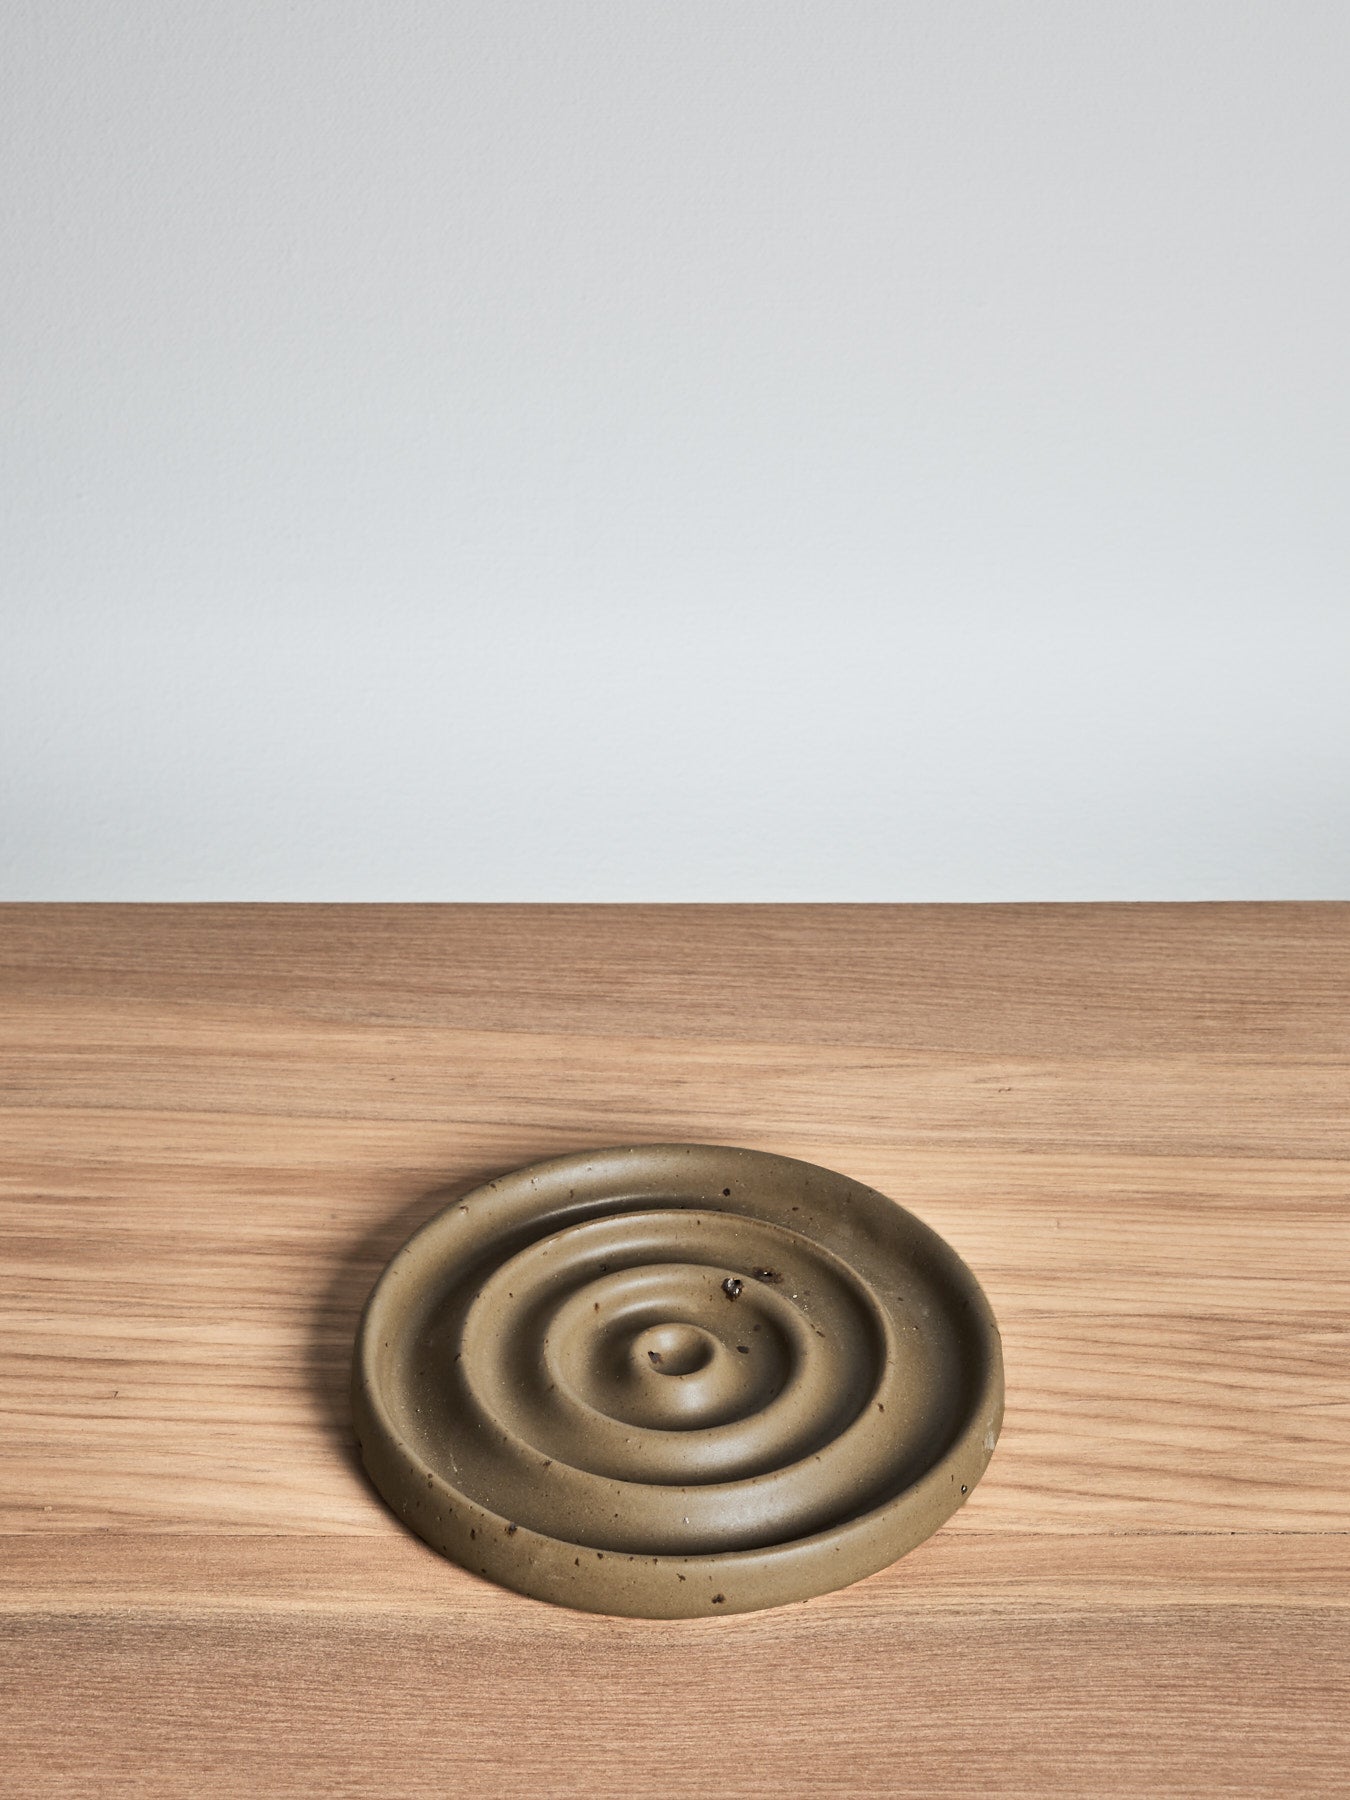 A Soap Dish - Moss by deborah sweeney, placed on a wooden table.